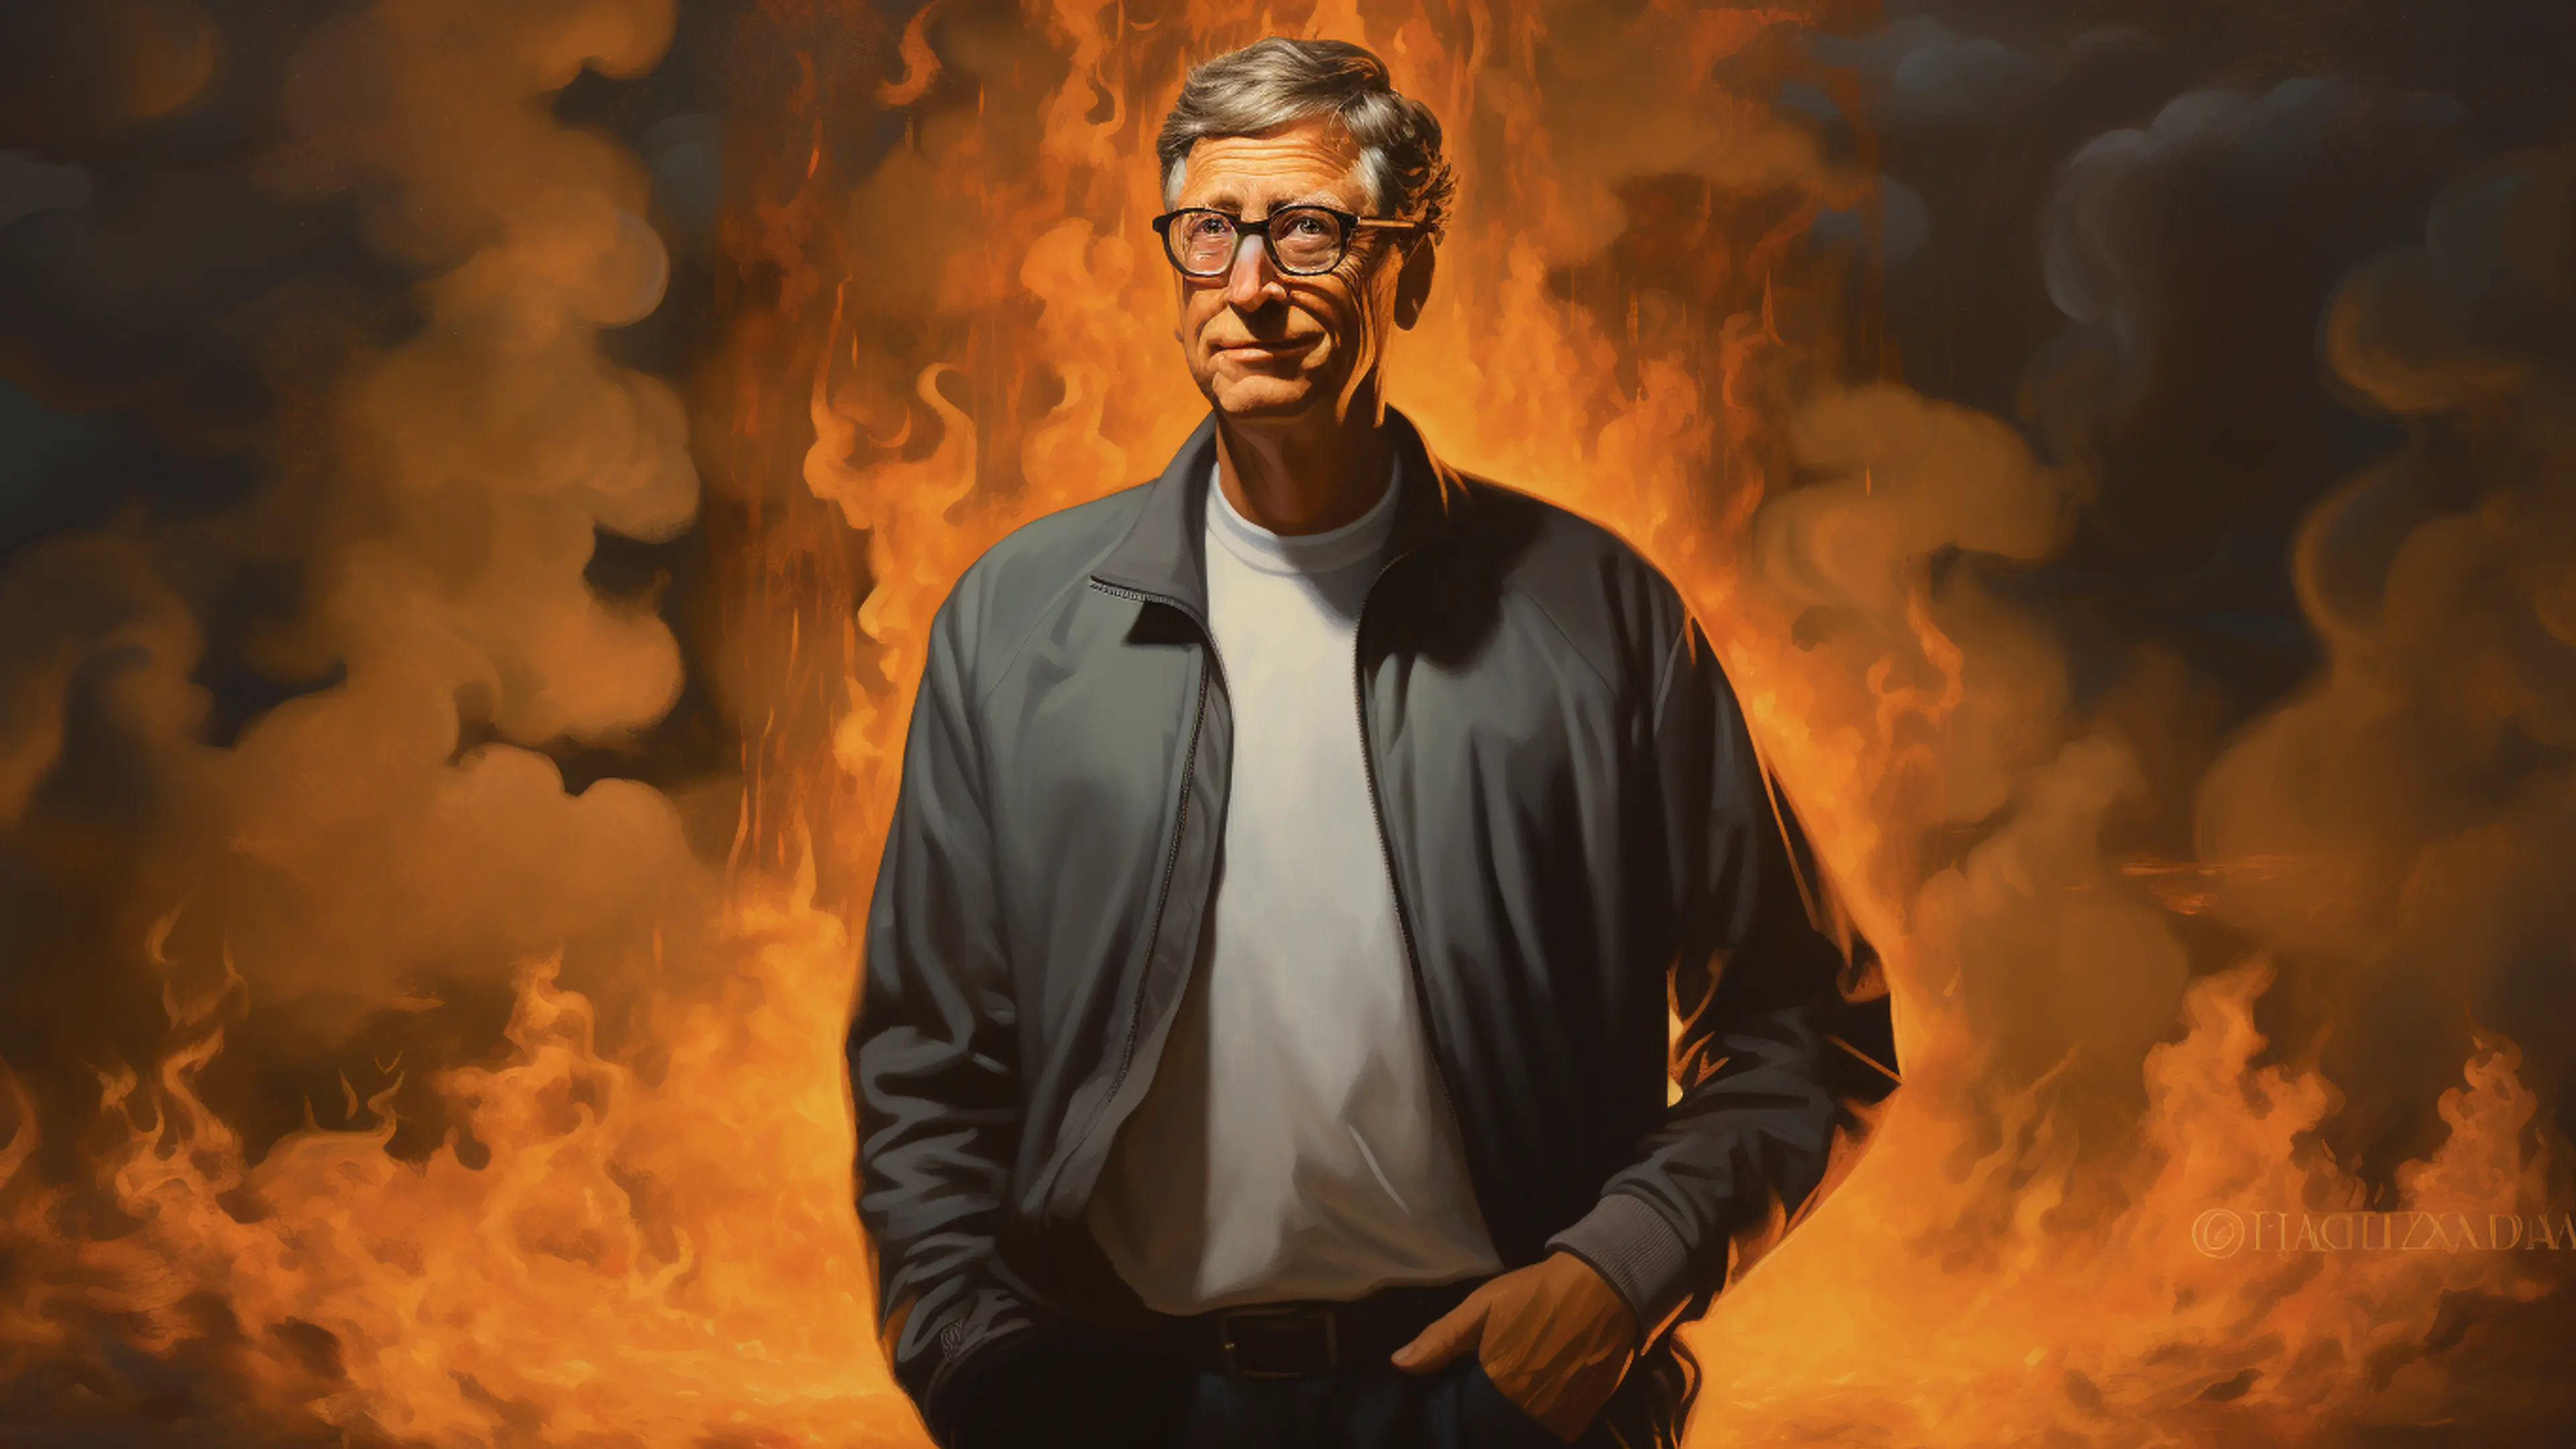 Bill Gates' top 5 must-read book recommendations revealed